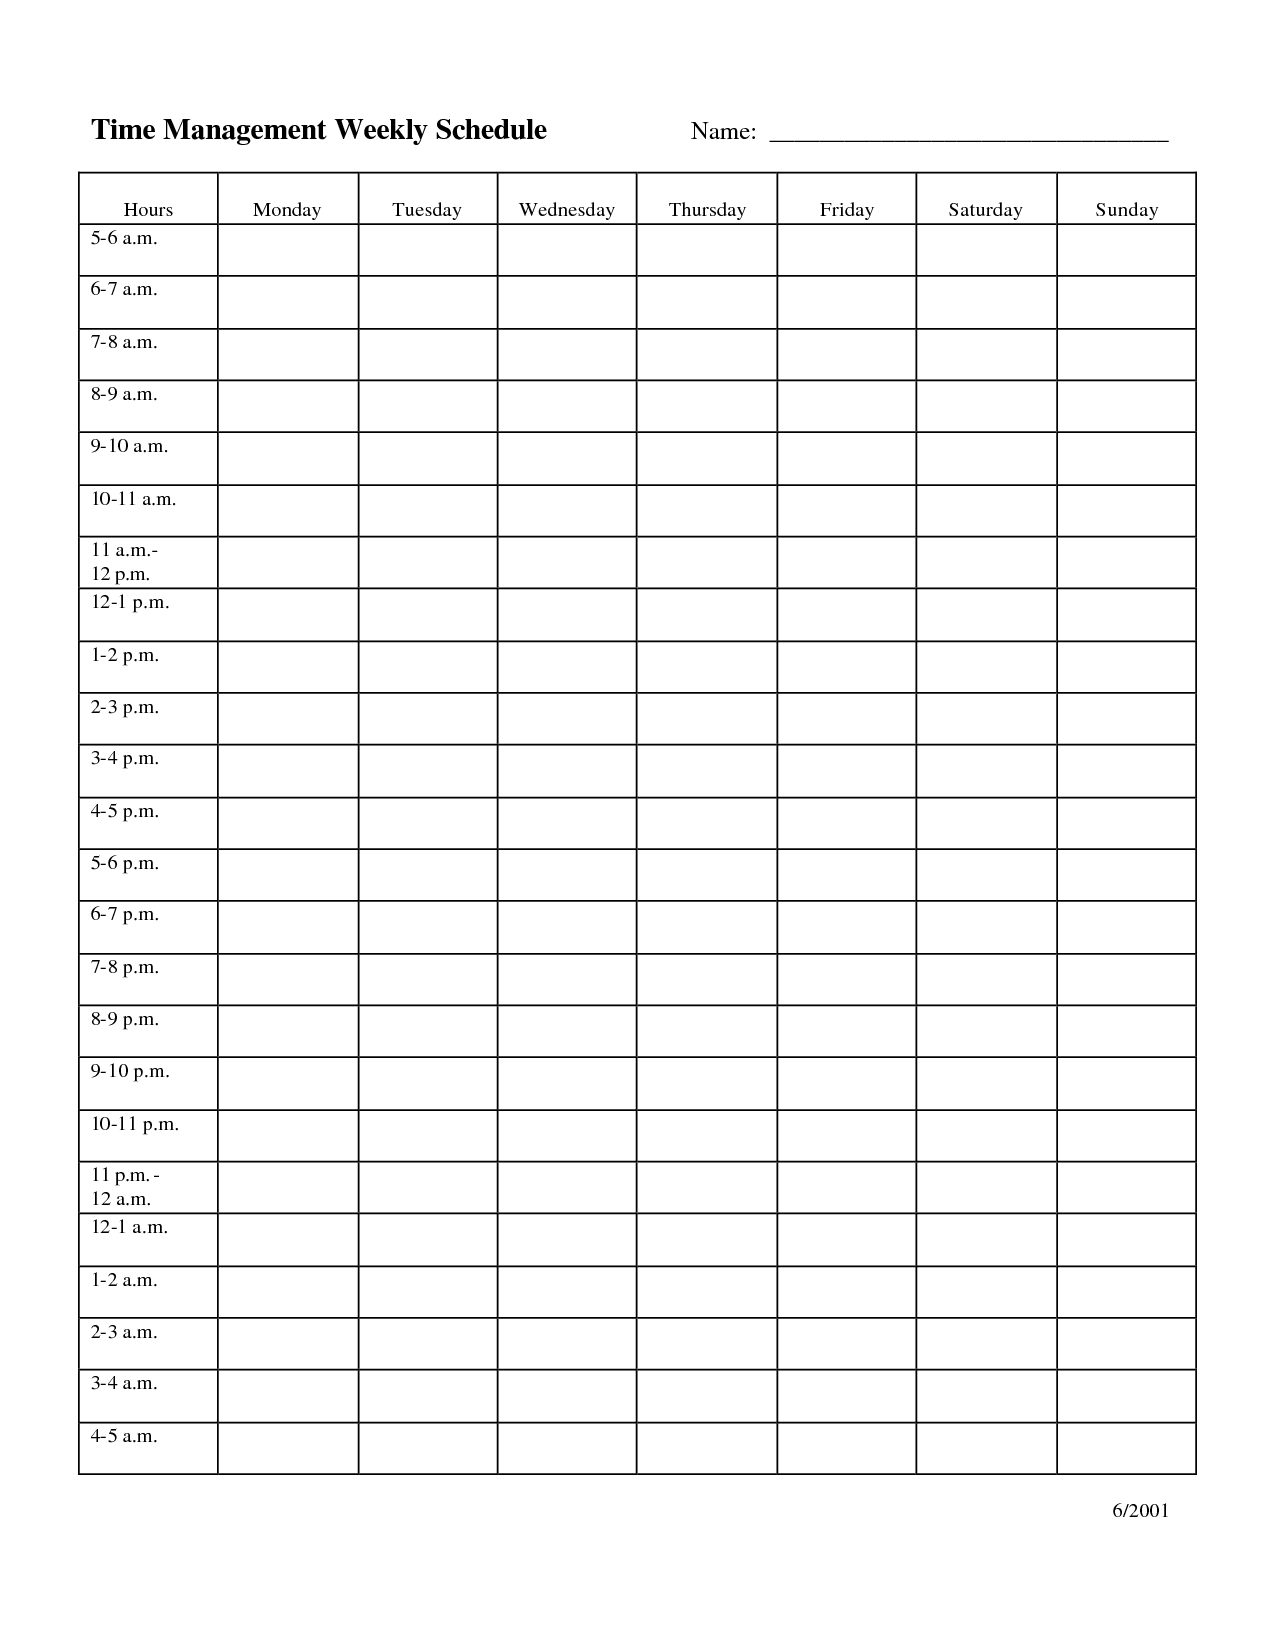 Time Management Weekly Schedule Template Daily Schedule Template 